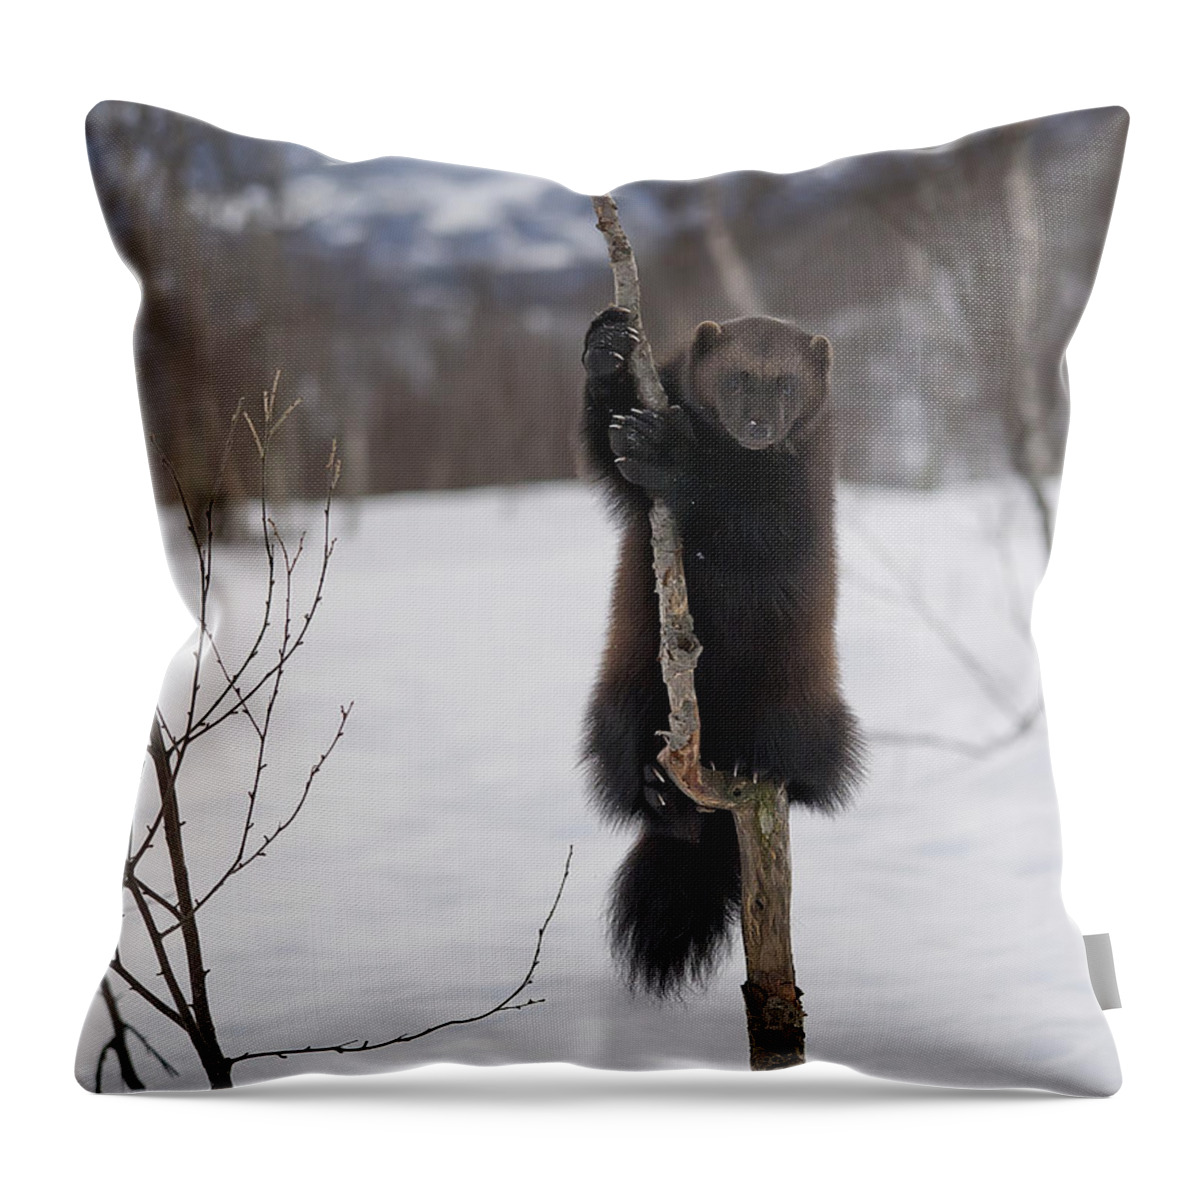 Wolverine Throw Pillow featuring the photograph Wolverine by Wade Aiken